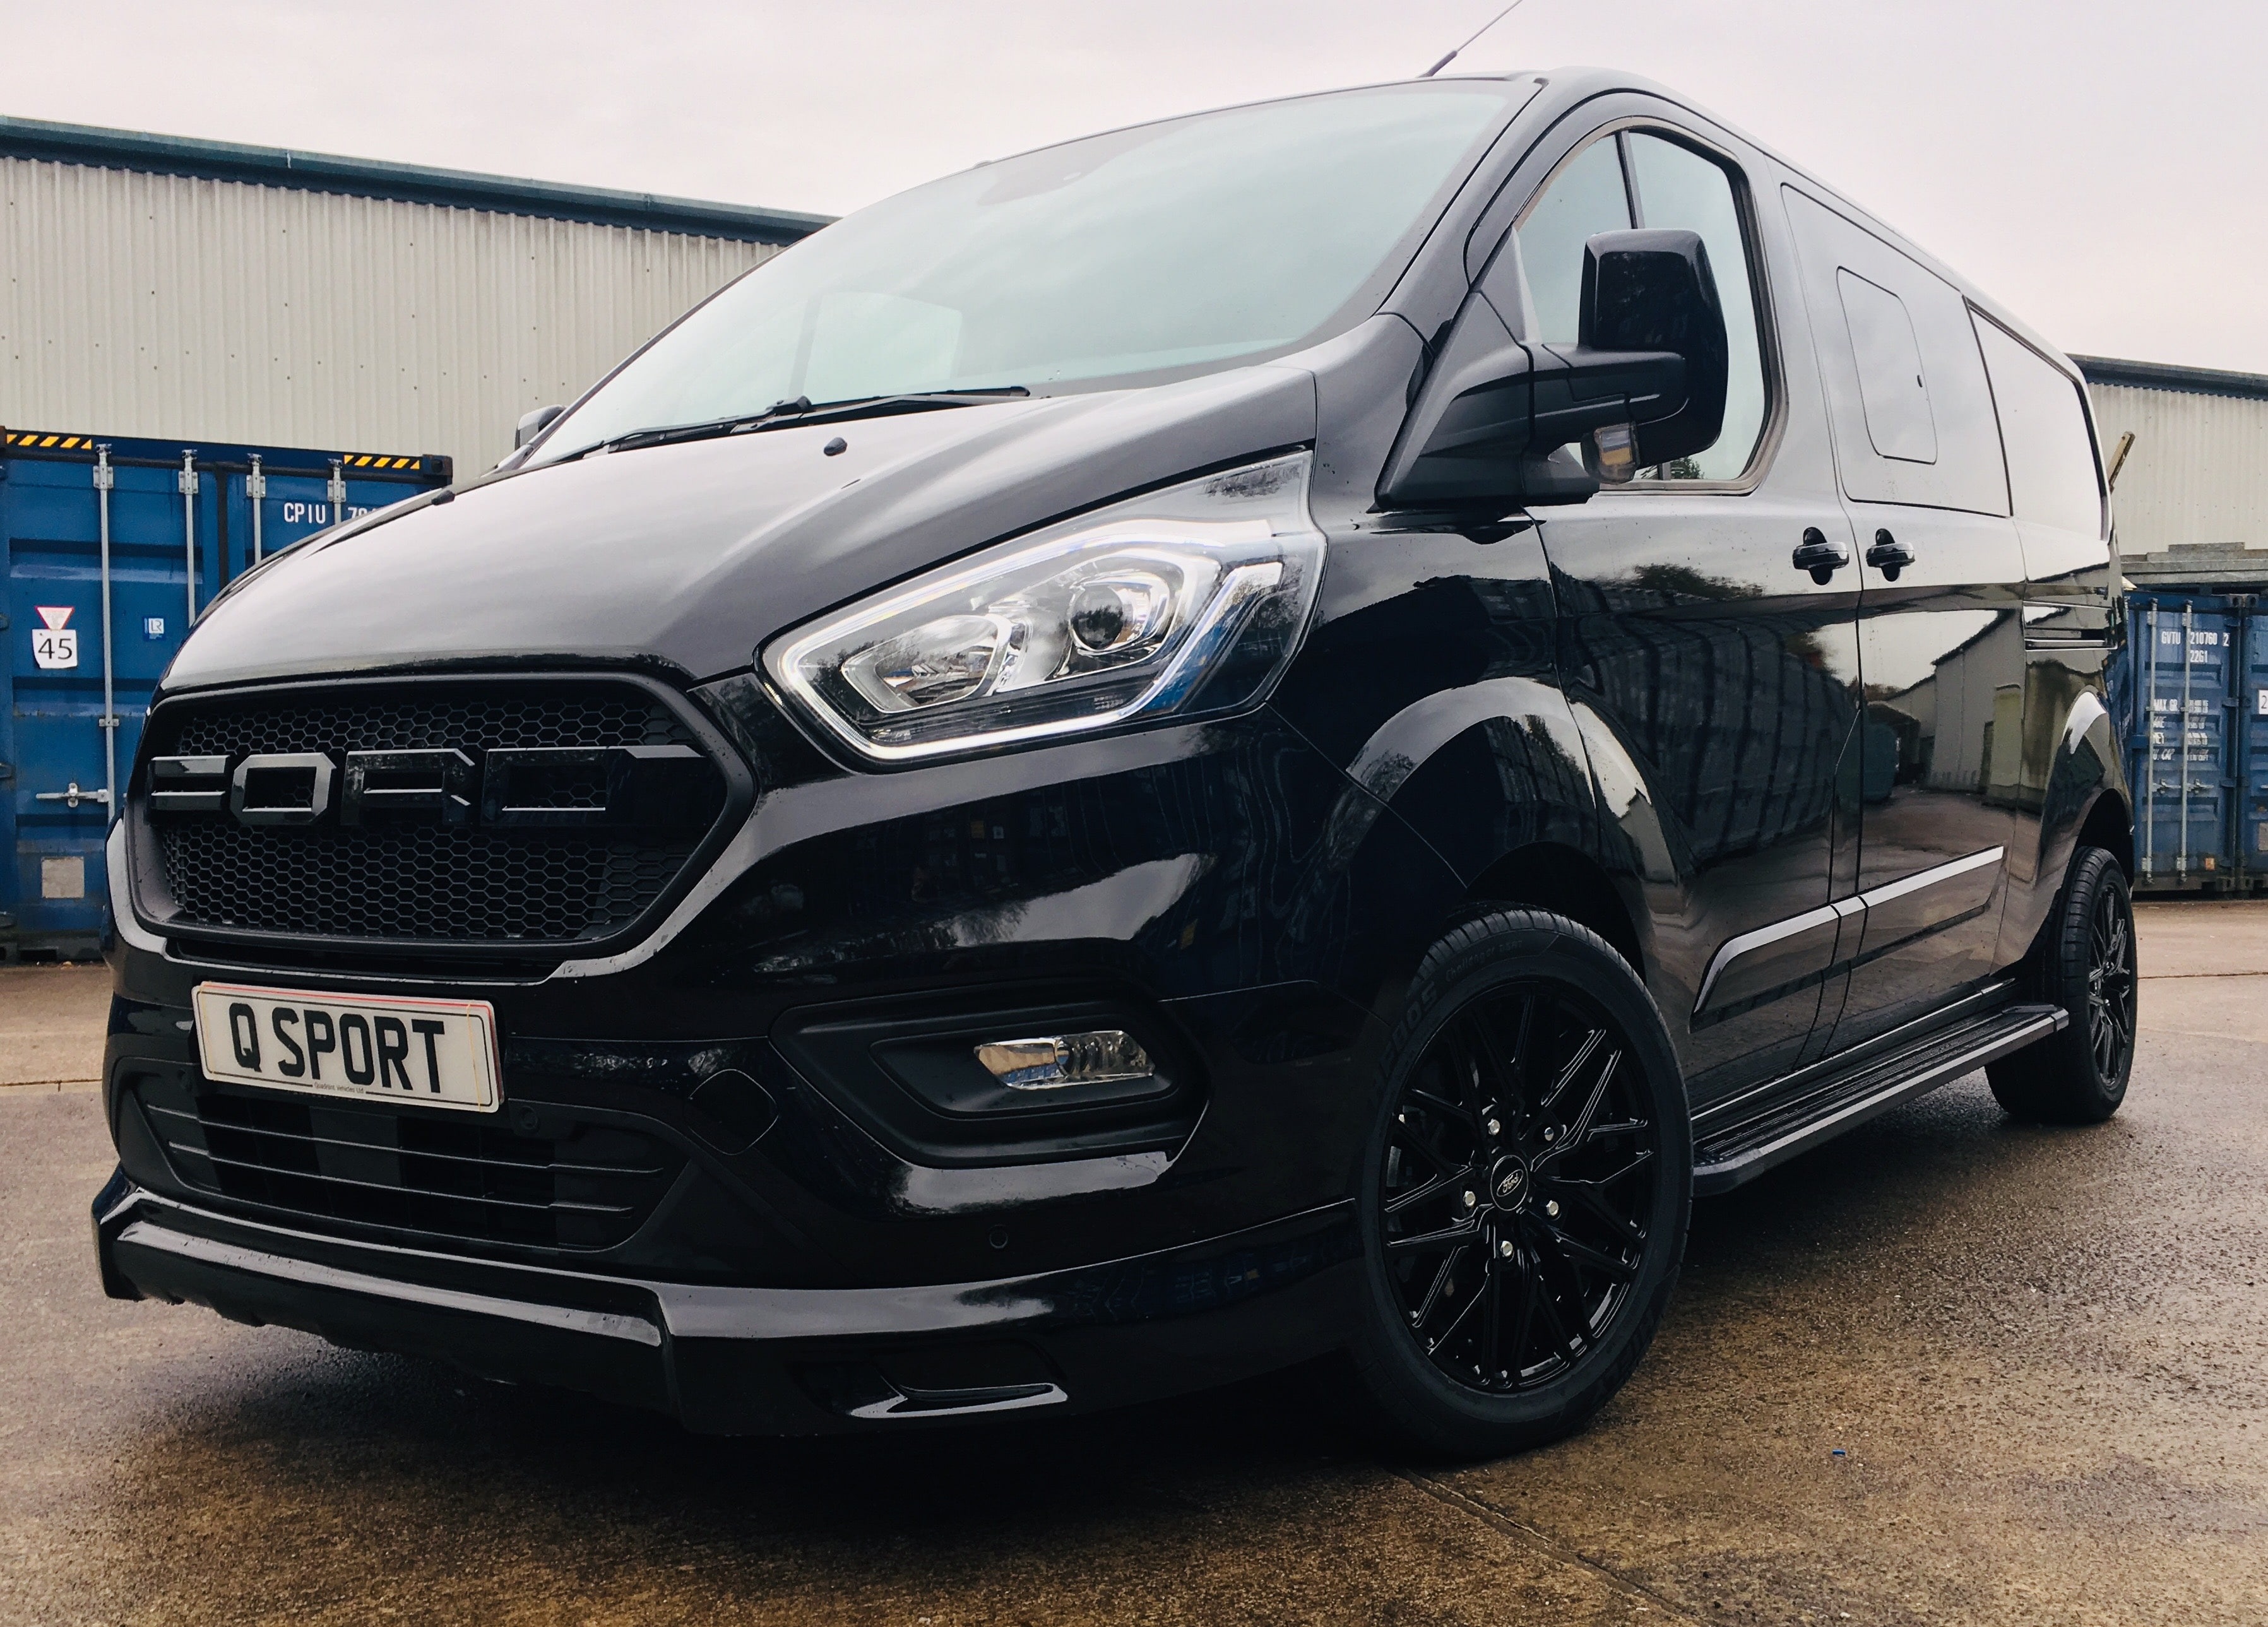 Ford-Transit-Custom-Q-Sport-with-Ford-Grille-Up-Close-Quadrant-Vehicles